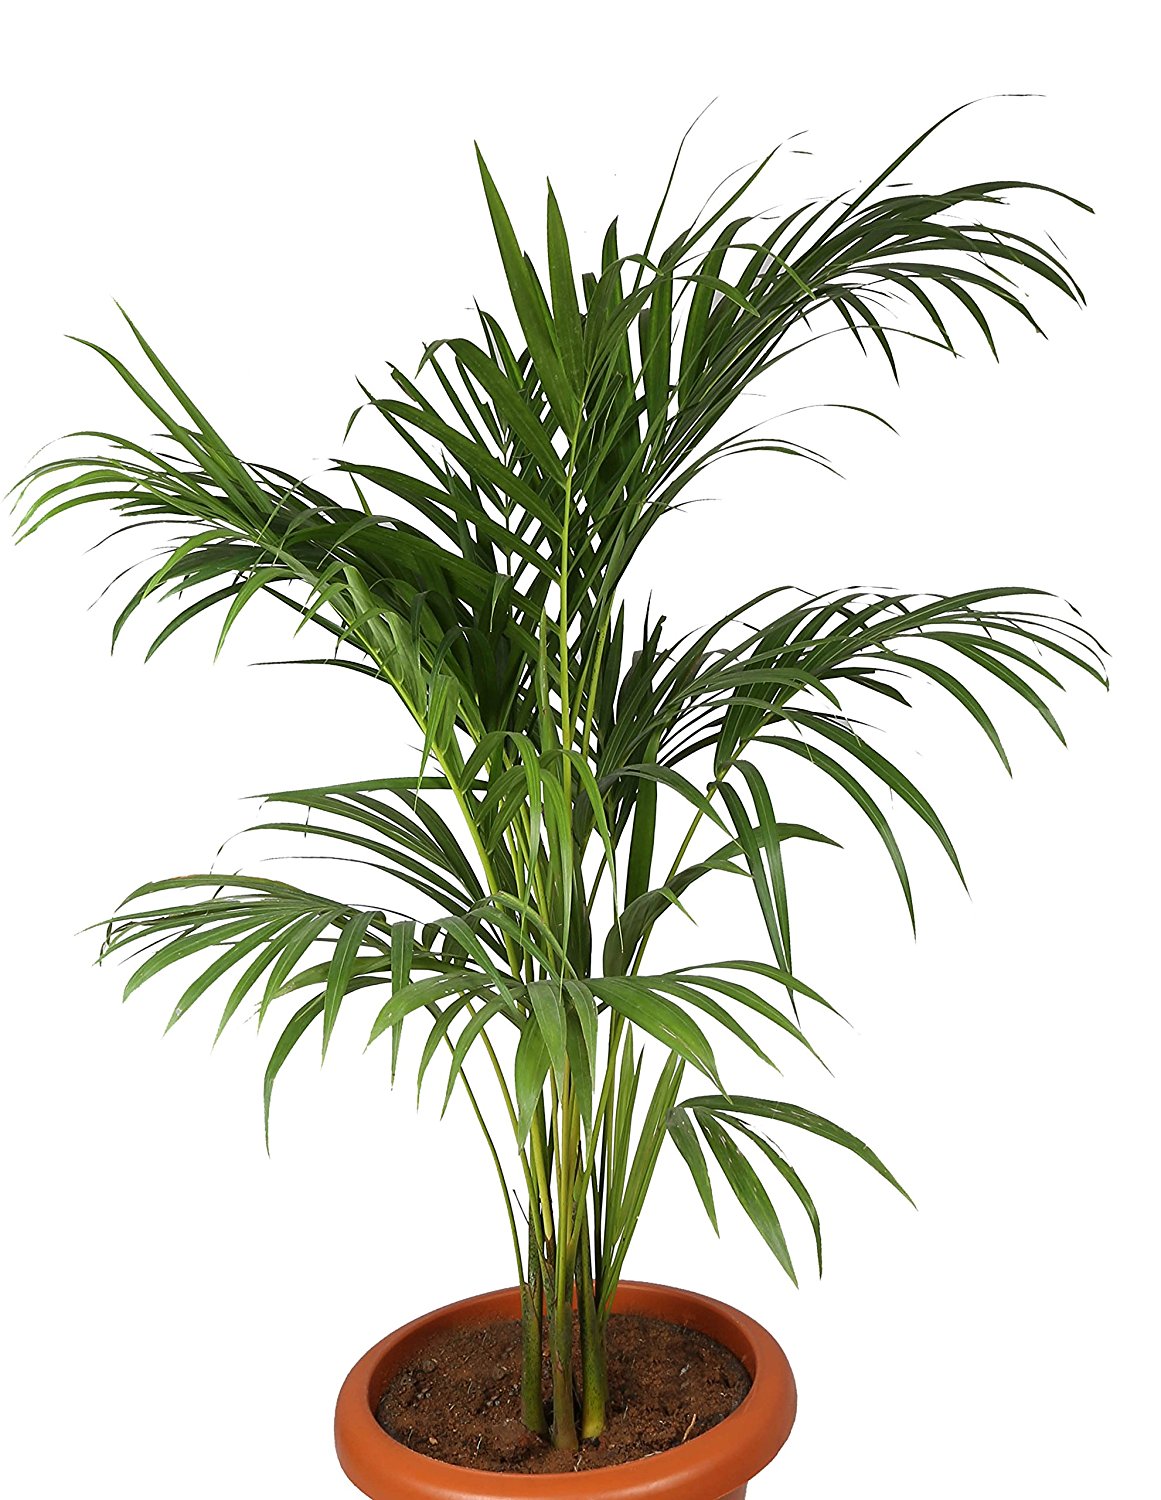 Areca Palm (Chrysalidocarpus lutescens), 6" to 1 gallon pot container live plant, 散尾葵. Also available in 5 gallon